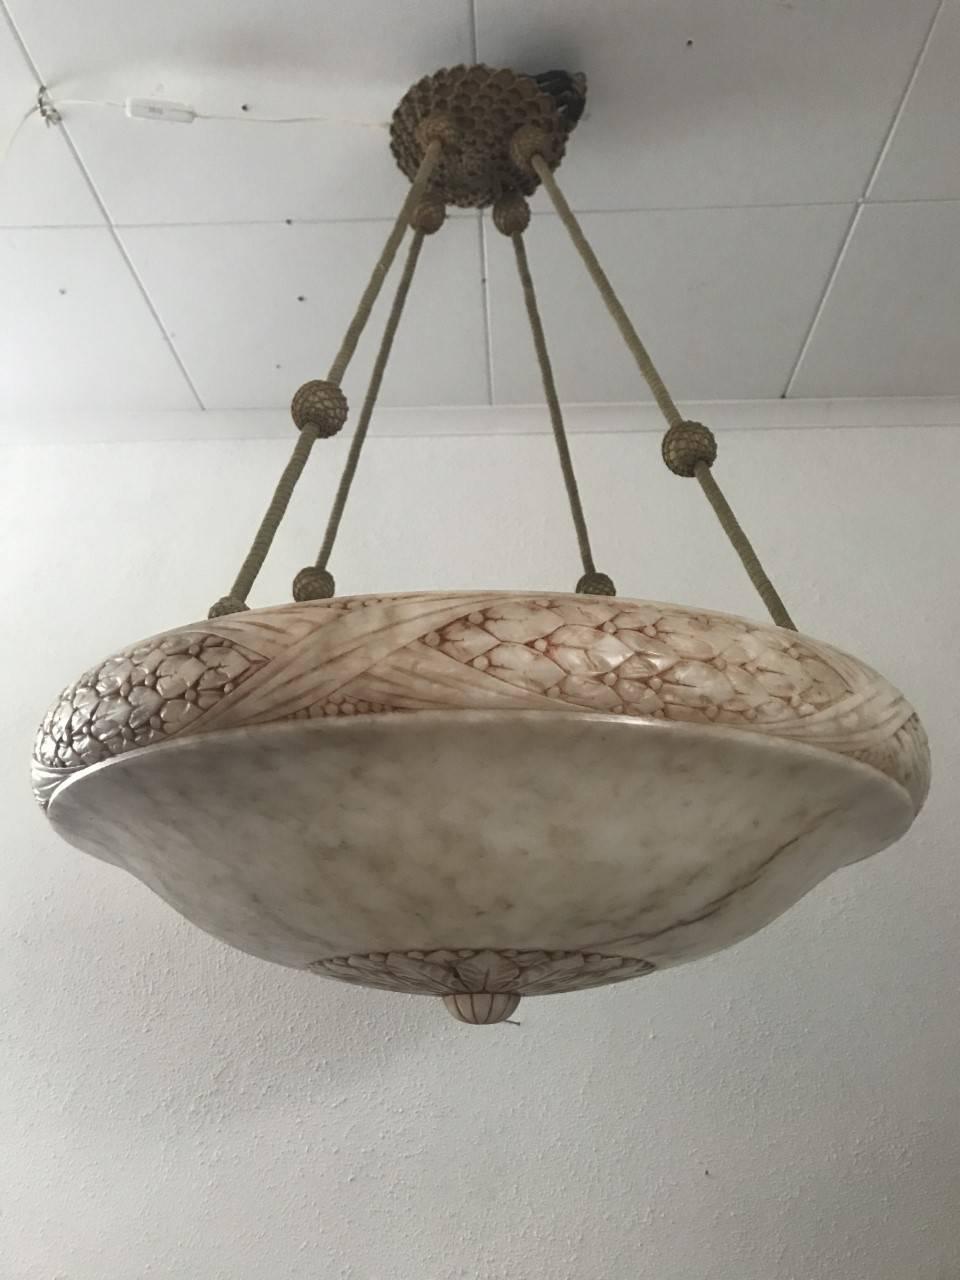 Very large rare Swedish Jugendstil Art Nouveau alabaster pendant lamp.
A very beautifully skilled carved alabaster lamp in light white beige alabaster made during the first quarter of the 20th century. The pendant measures massive 60cm in diameter